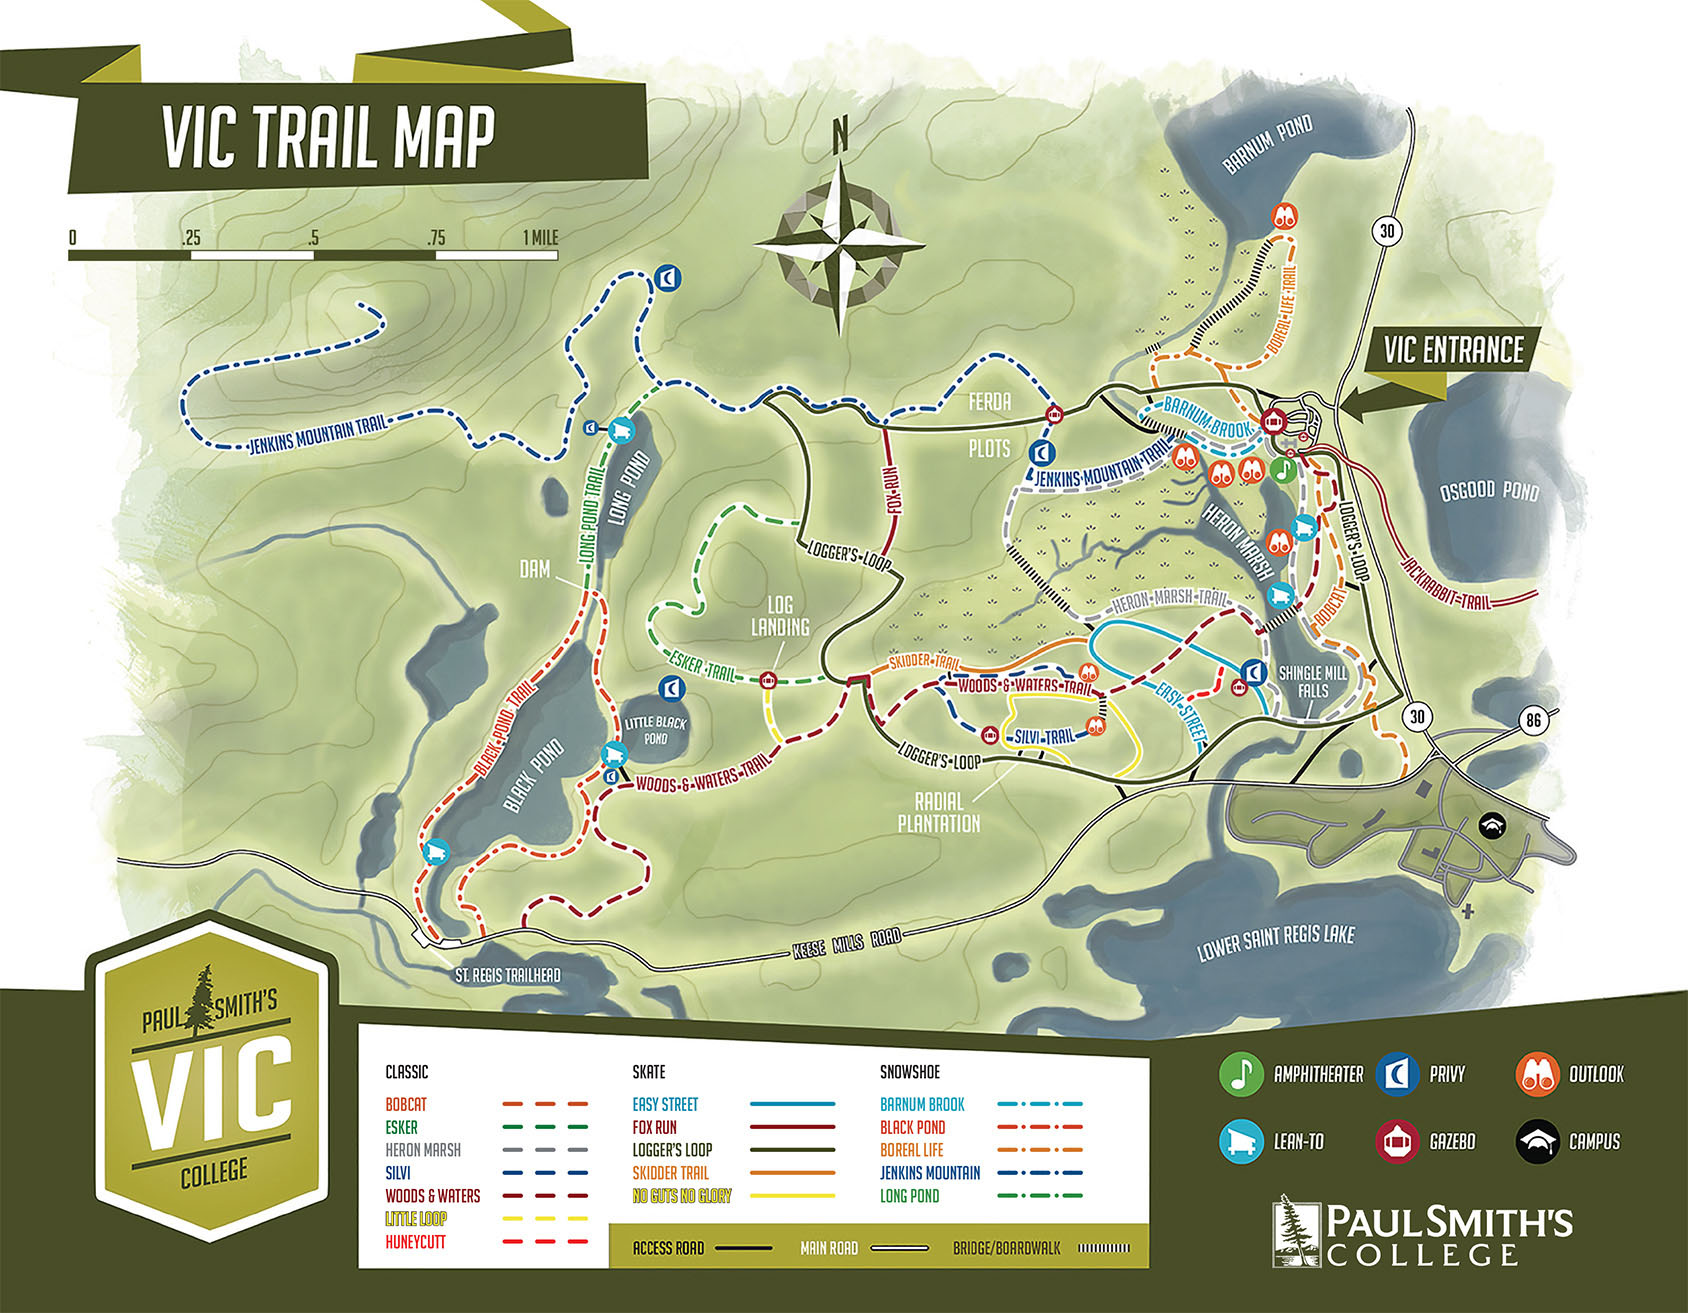 Adirondack Nature Trails: Paul Smith's College VIC Trail Map